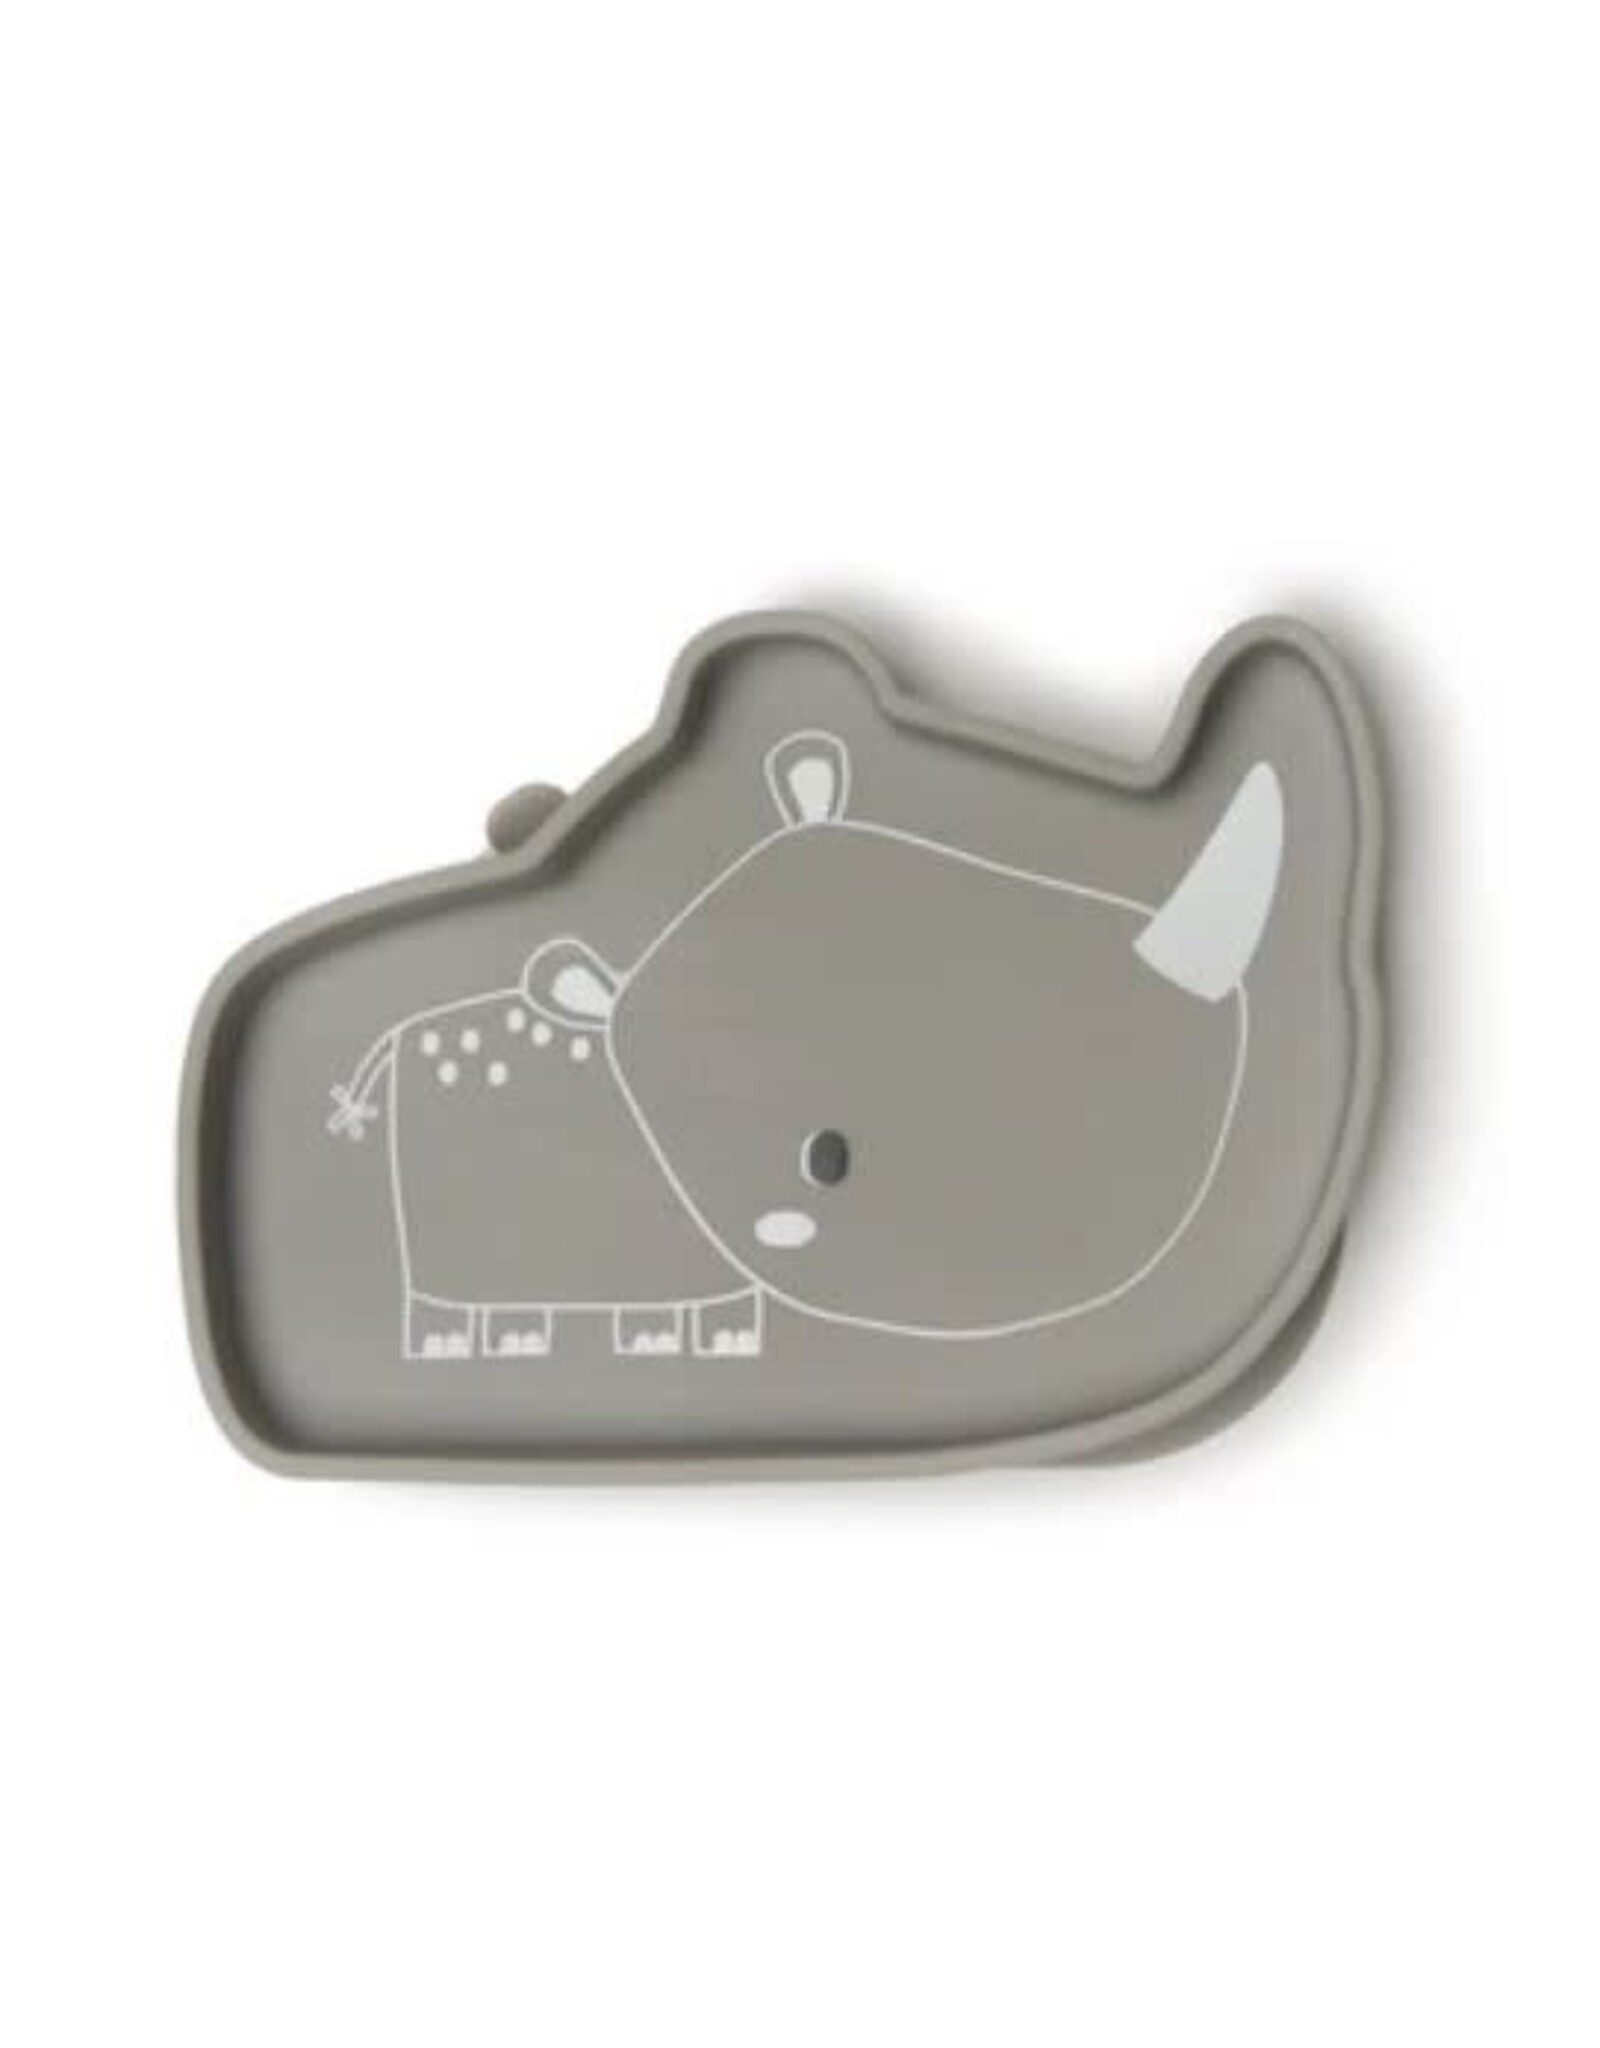 Loulou Lollipop Born to be Wild Silicone Snack Plate - Rhino